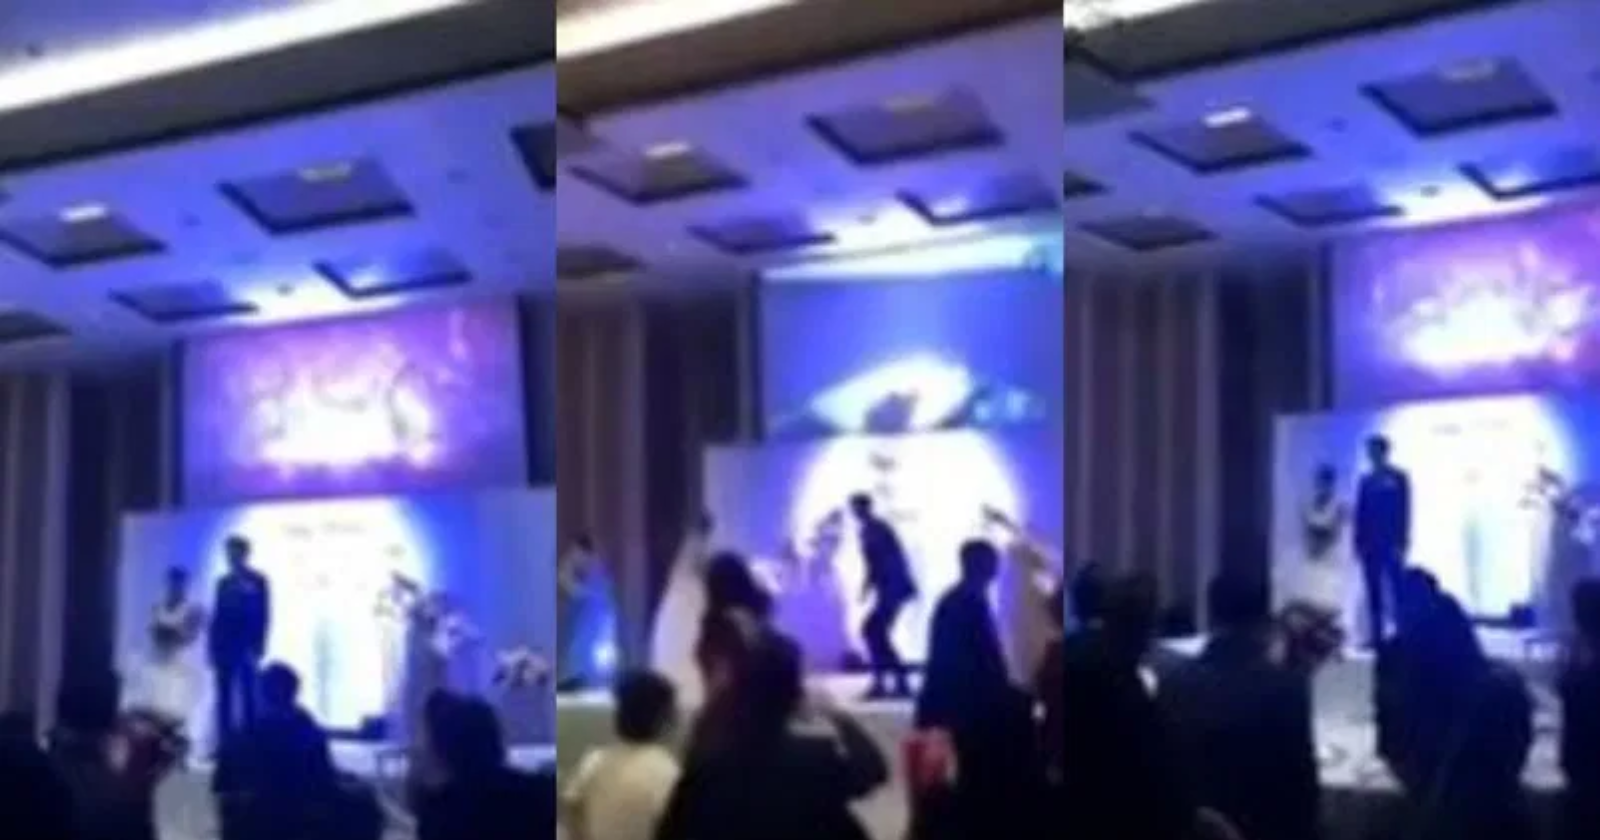 WATCH Groom Finds Out His Bride to Be Had Been Cheating on